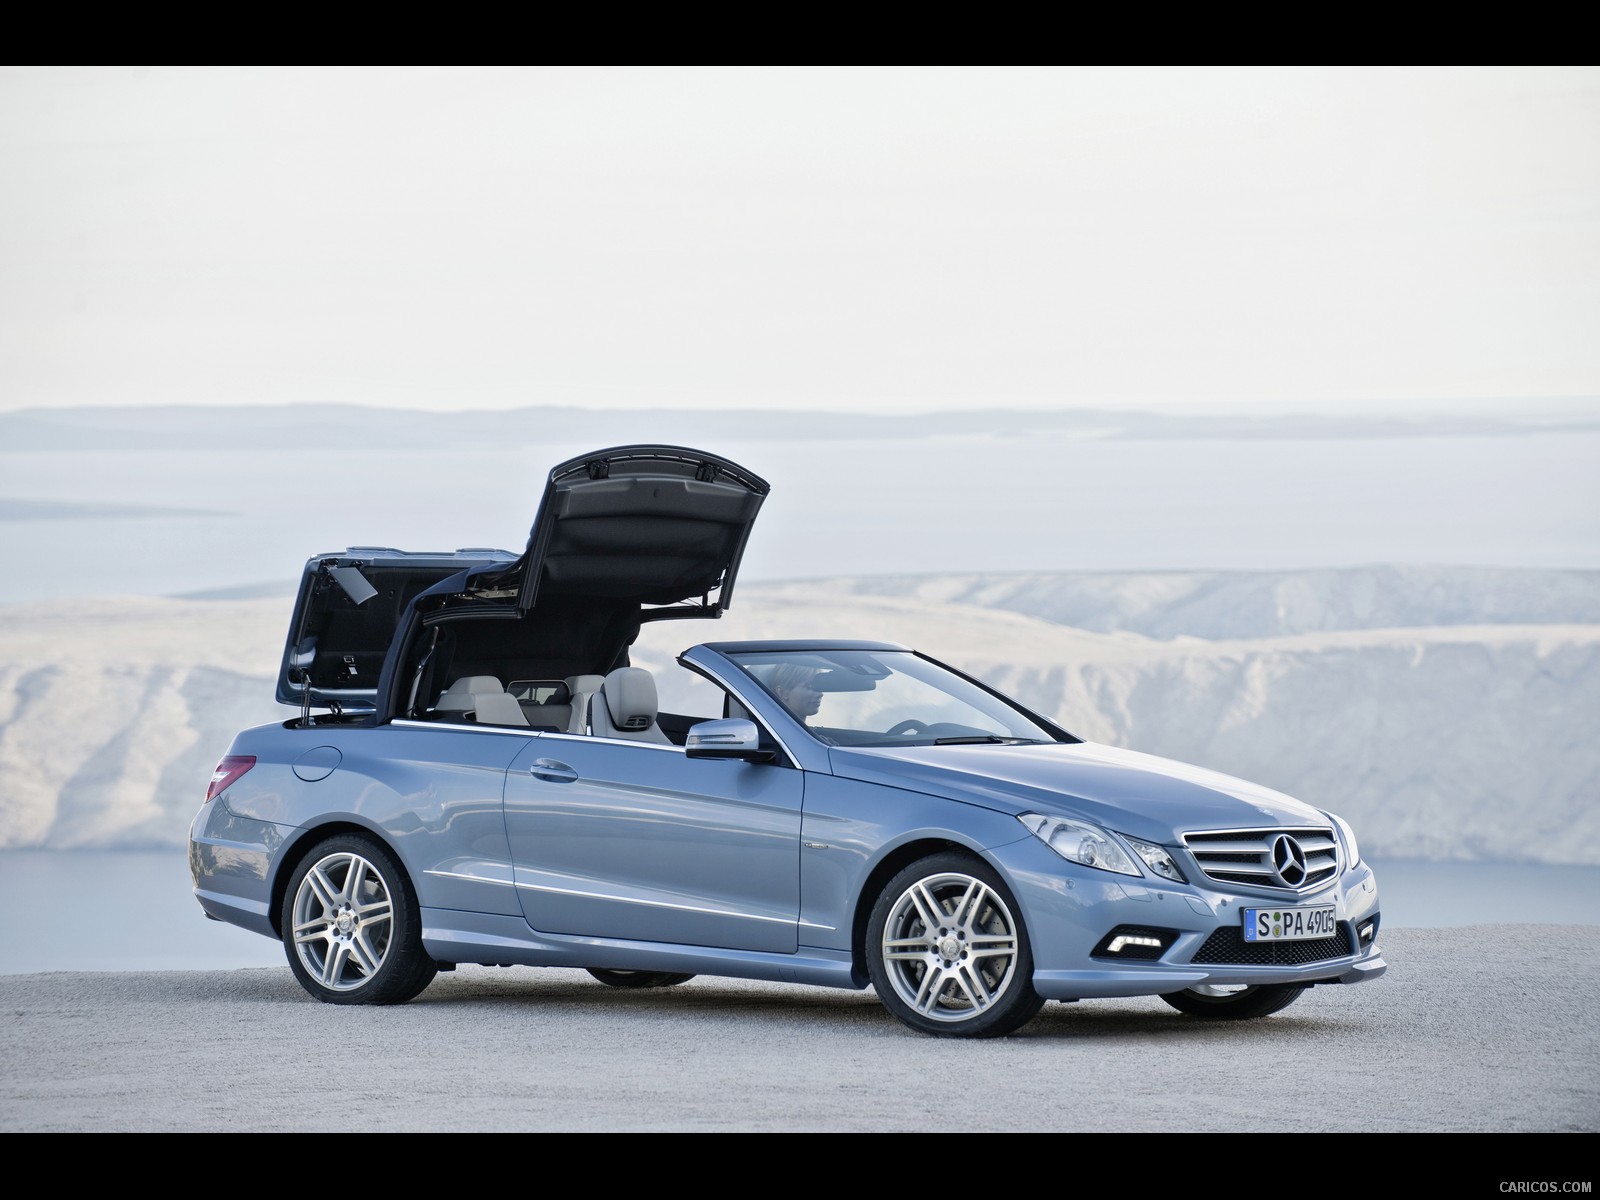 Mercedes-Benz E-Class Cabriolet - Top In Action - , #45 of 165